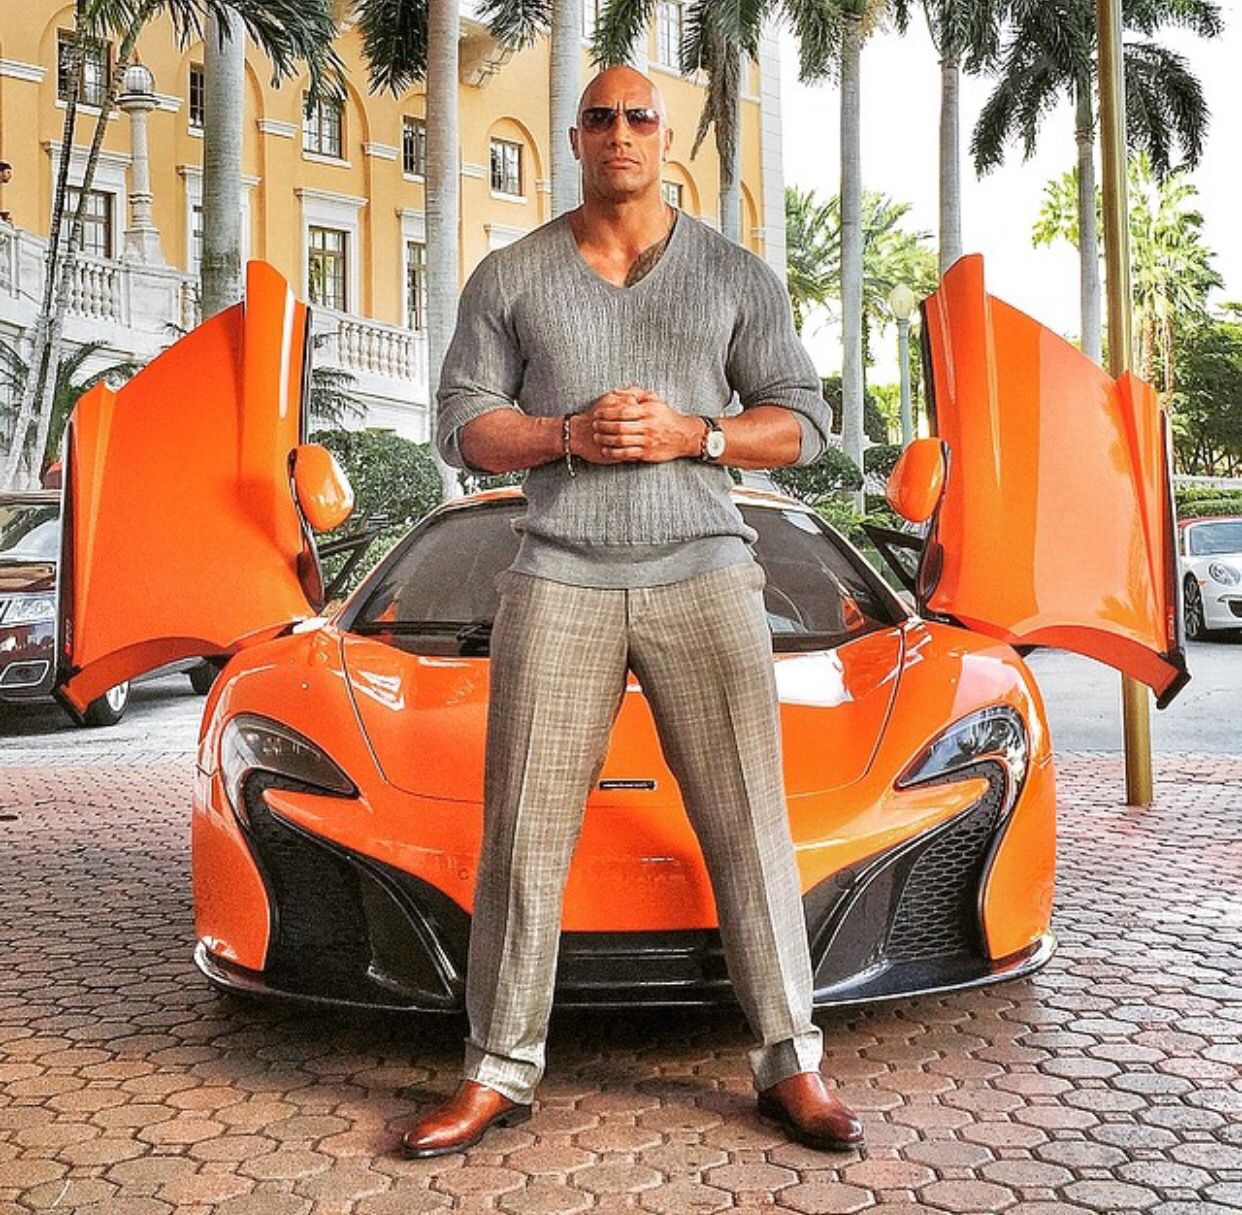 bao the rock surprised everyone when he gave his daughter a mclaren spider s when she debuted in the wrestling industry when she just turned years old 6521834e9ad08 The Rock Surprised Everyone When He Gave His Daughter A Mclaren Spider 720s When She Debuted In The Wrestling Industry When She Just Turned 19 Years Old.